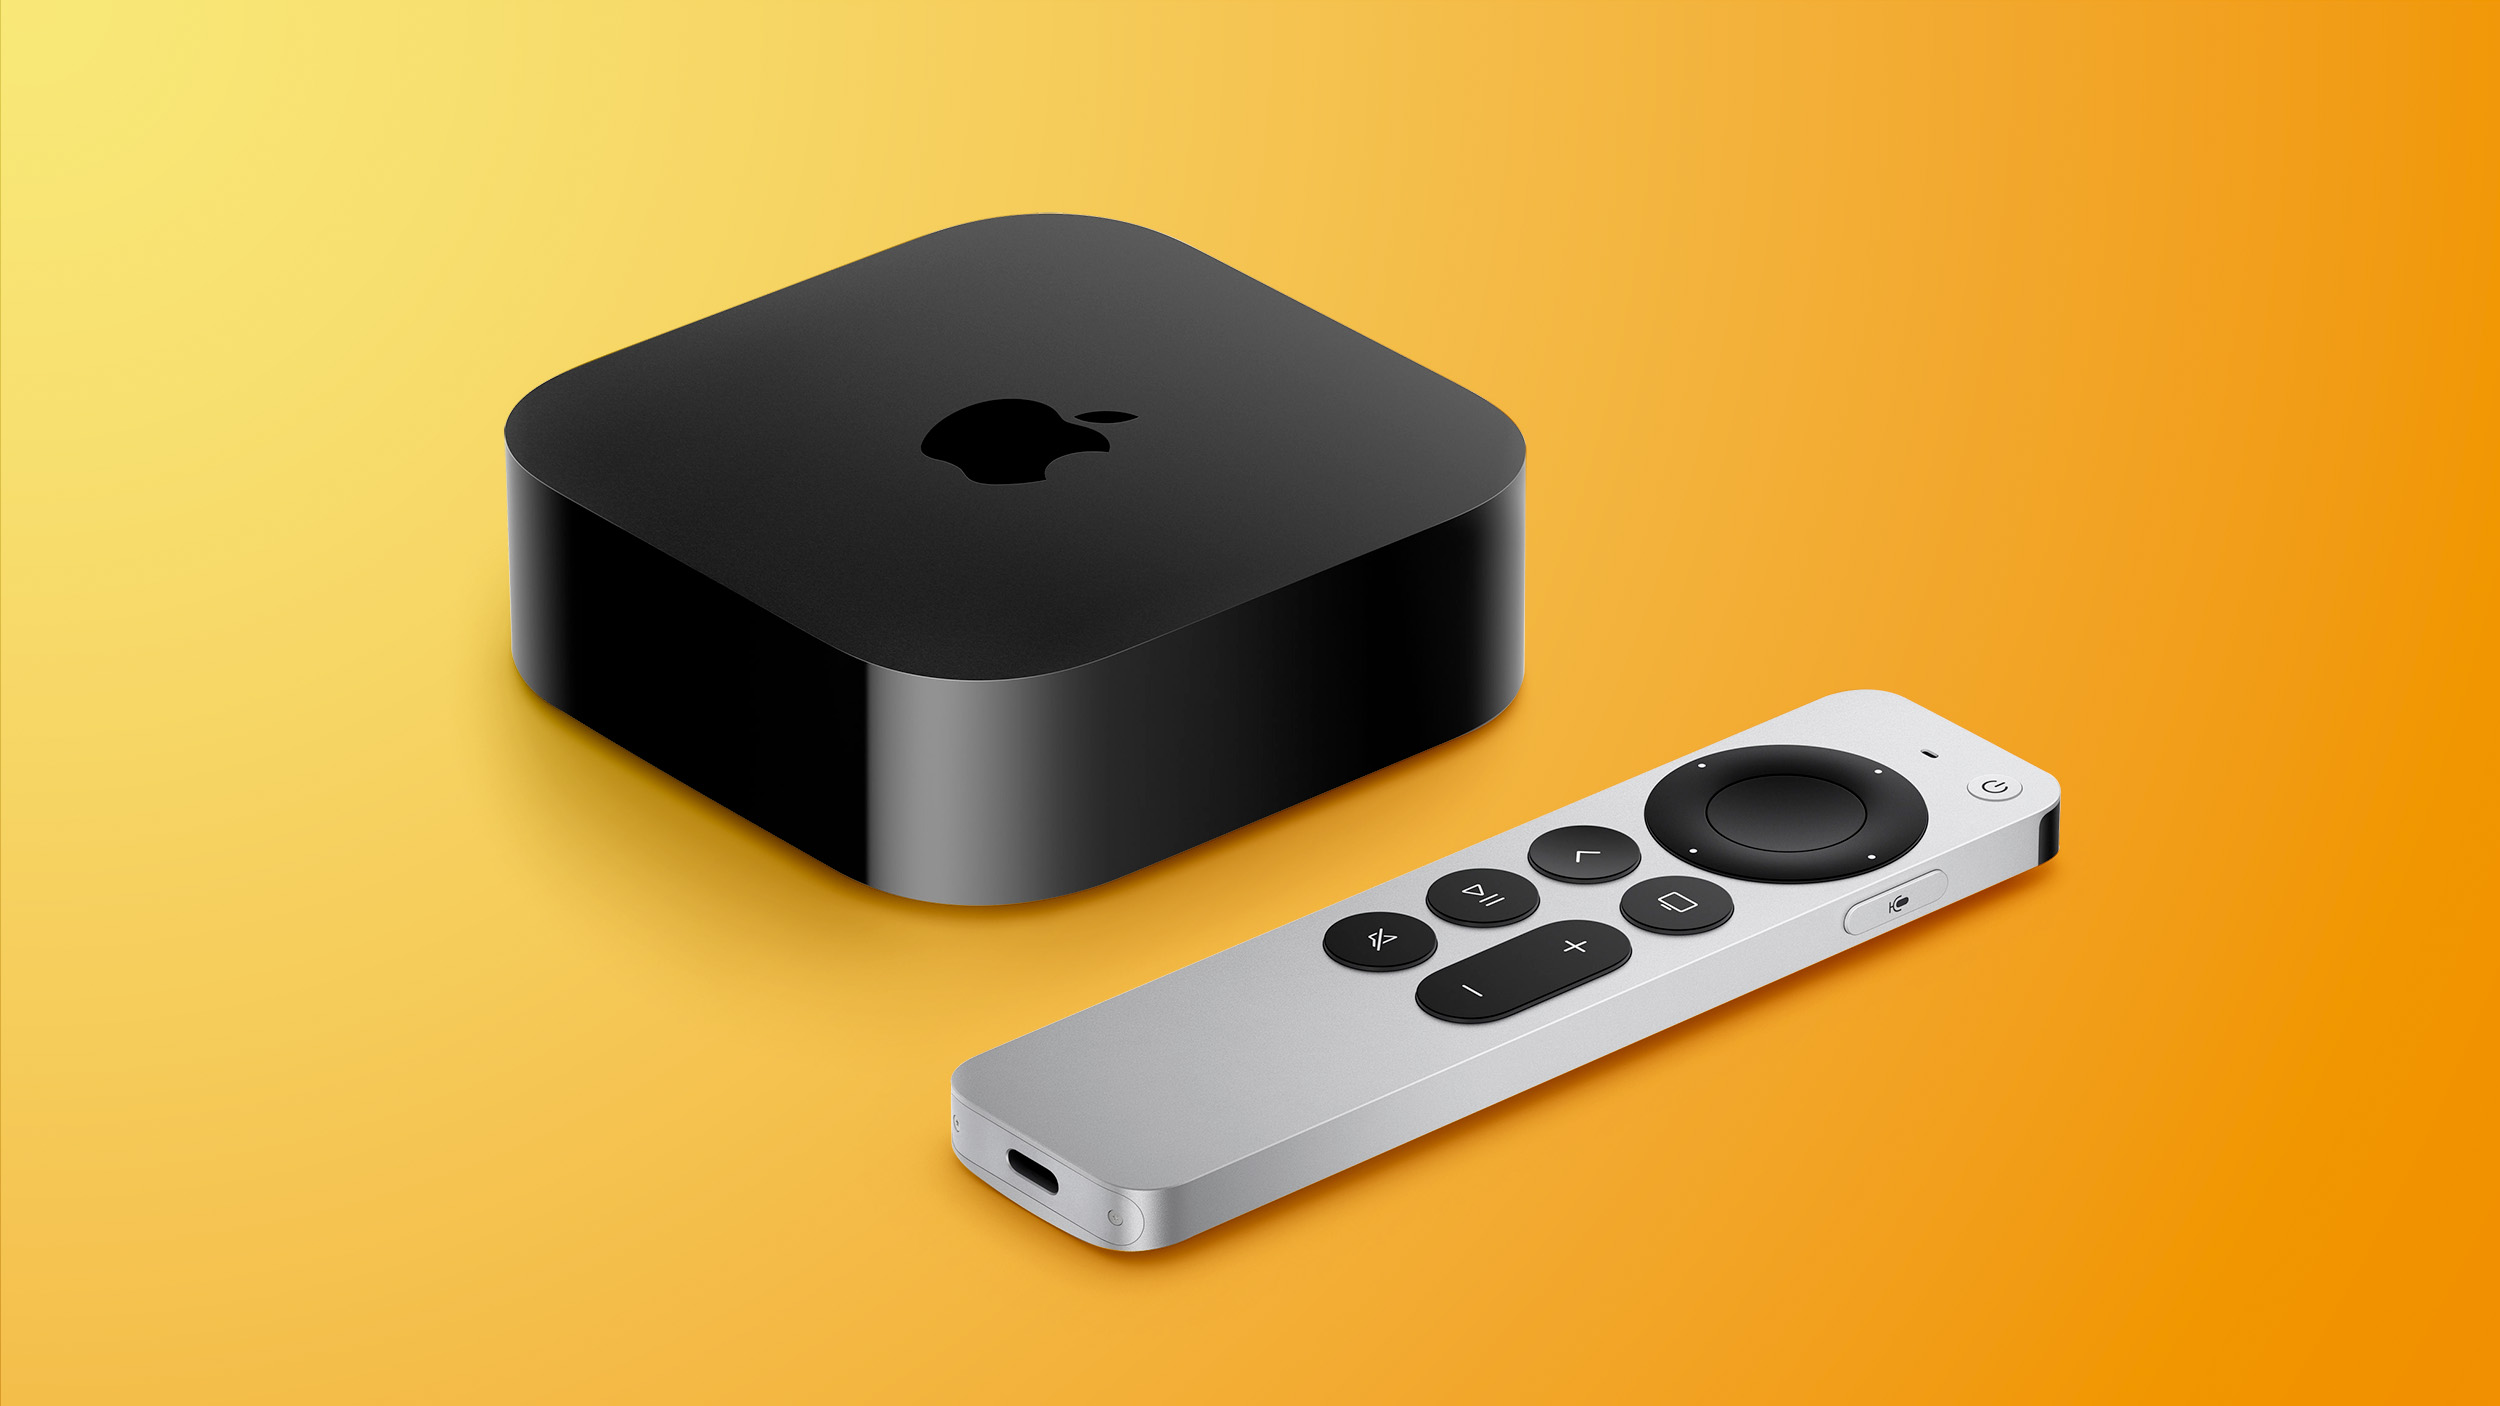 bag Atlantic smog Apple TV: Should You Buy? Features, Reviews, and More